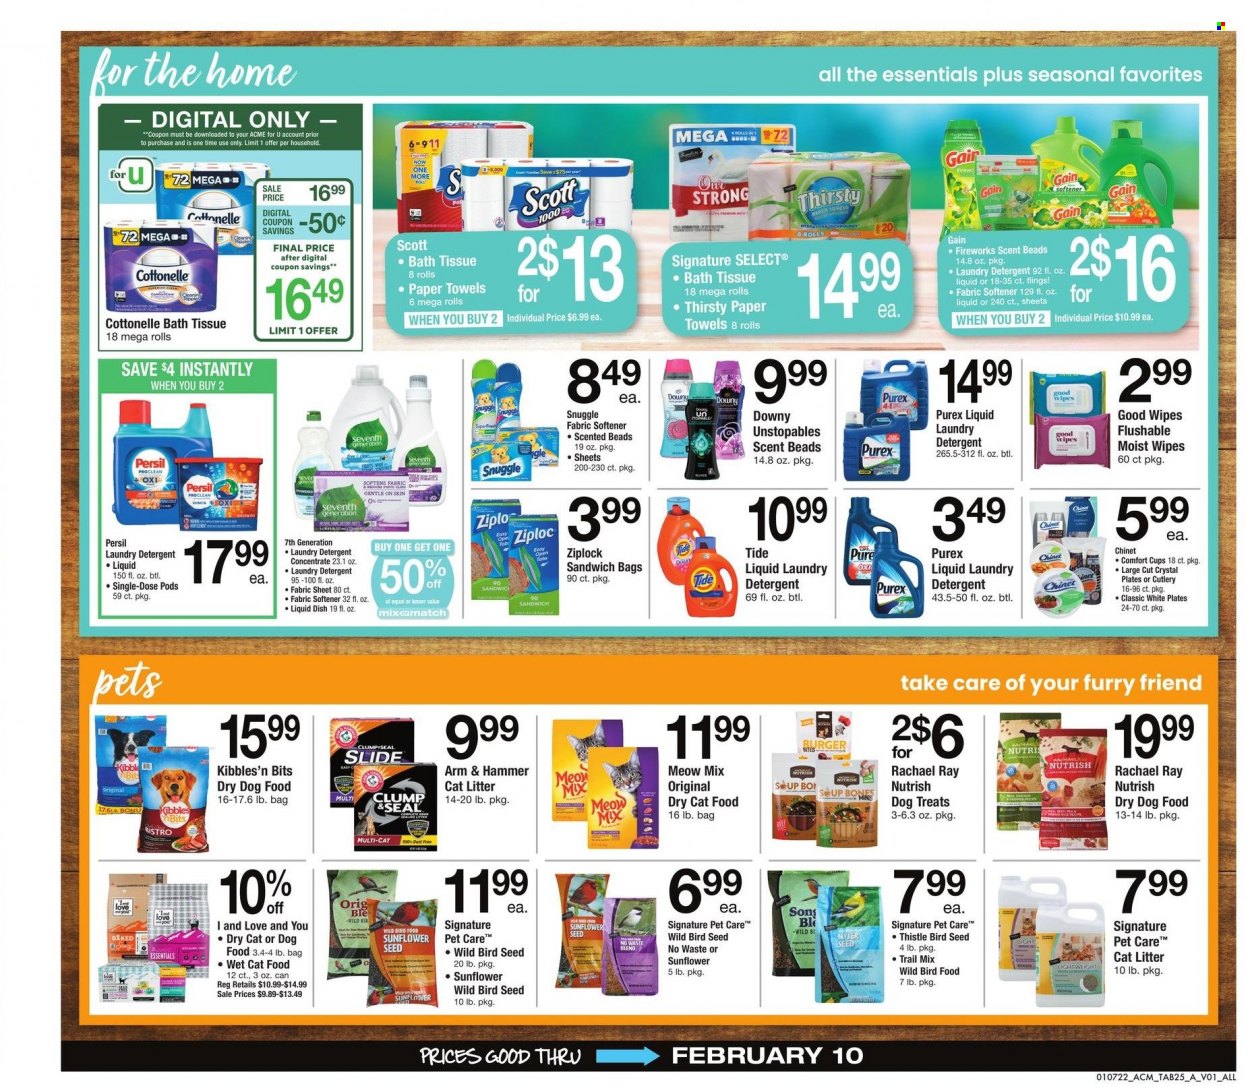 thumbnail - ACME Flyer - 01/07/2022 - 02/10/2022 - Sales products - Scott, soup, ARM & HAMMER, trail mix, wipes, bath tissue, Cottonelle, kitchen towels, paper towels, detergent, Gain, Snuggle, Tide, Unstopables, Persil, fabric softener, laundry detergent, Purex, Ziploc, plate, cup, cat litter, animal food, bird food, cat food, dog food, dry dog food, dry cat food, Meow Mix, Nutrish, wet cat food. Page 25.